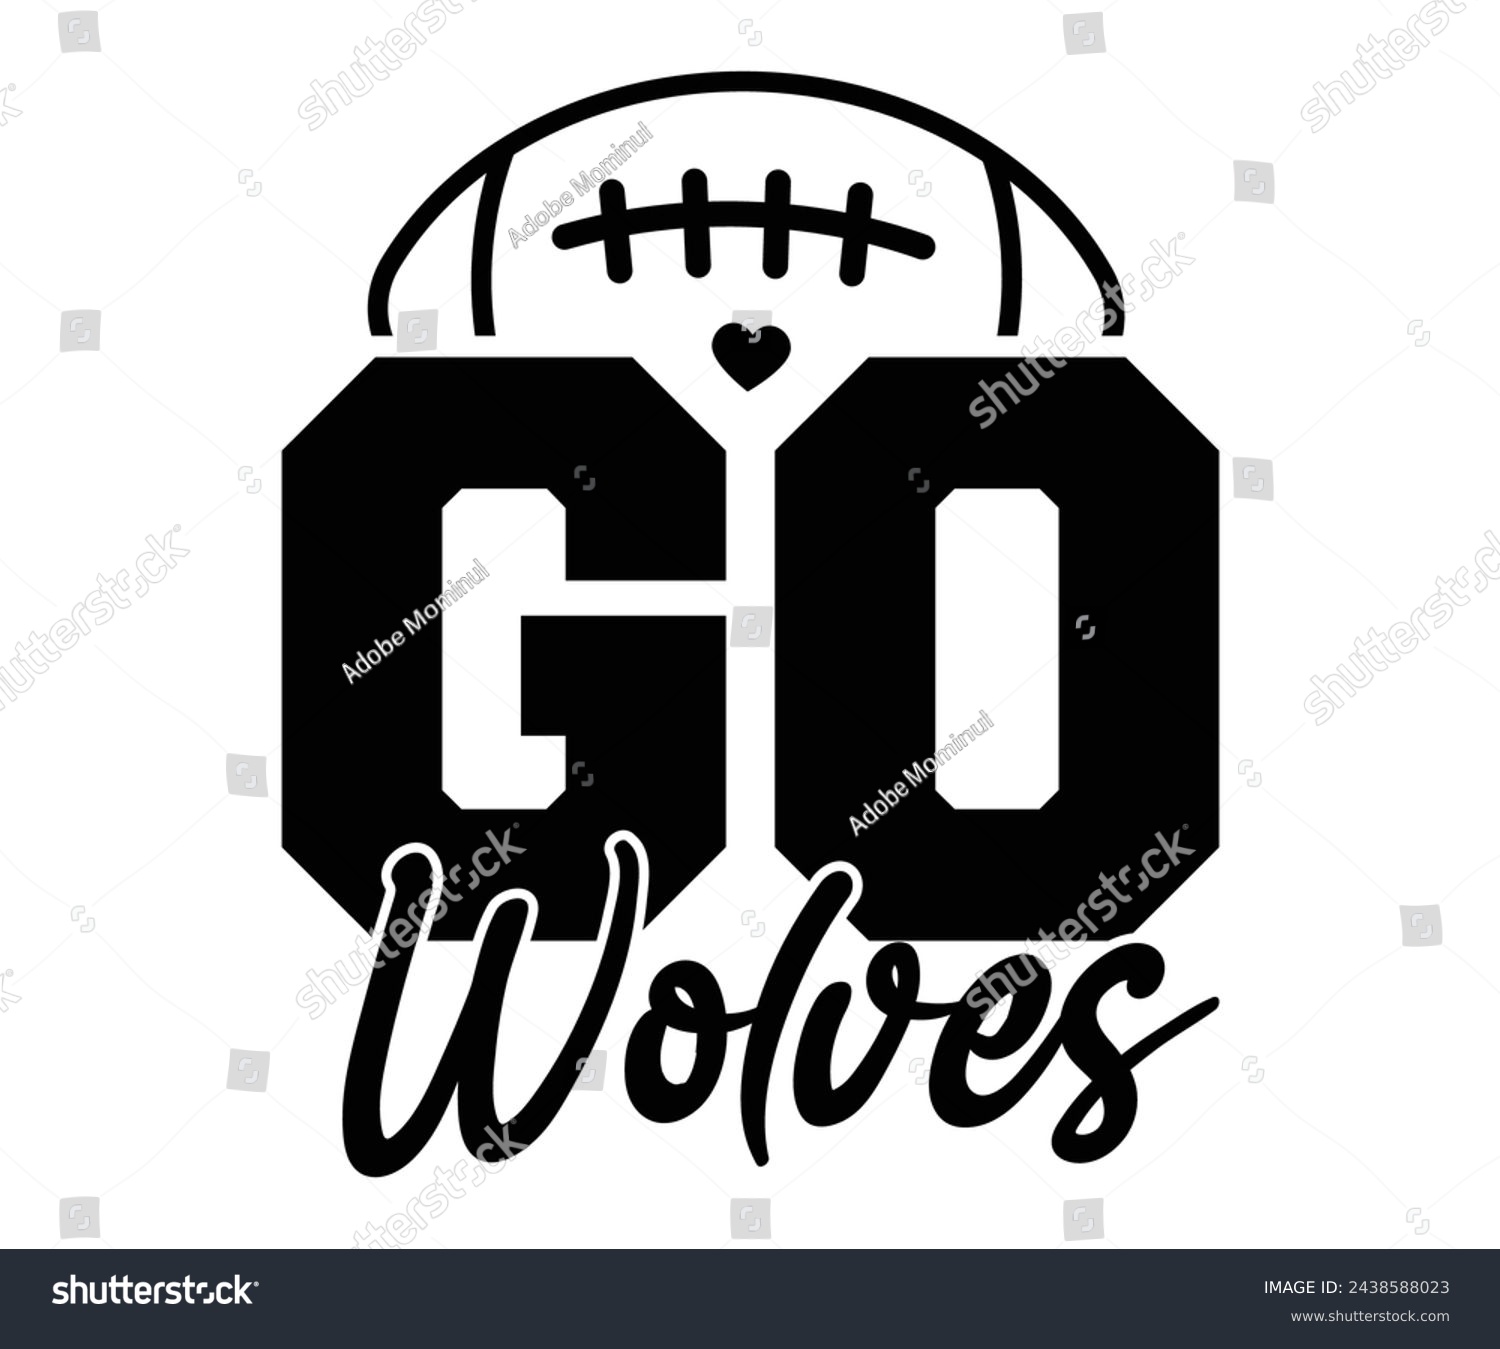 SVG of Go Wolves,Football Svg,Football Player Svg,Game Day Shirt,Football Quotes Svg,American Football Svg,Soccer Svg,Cut File,Commercial use svg